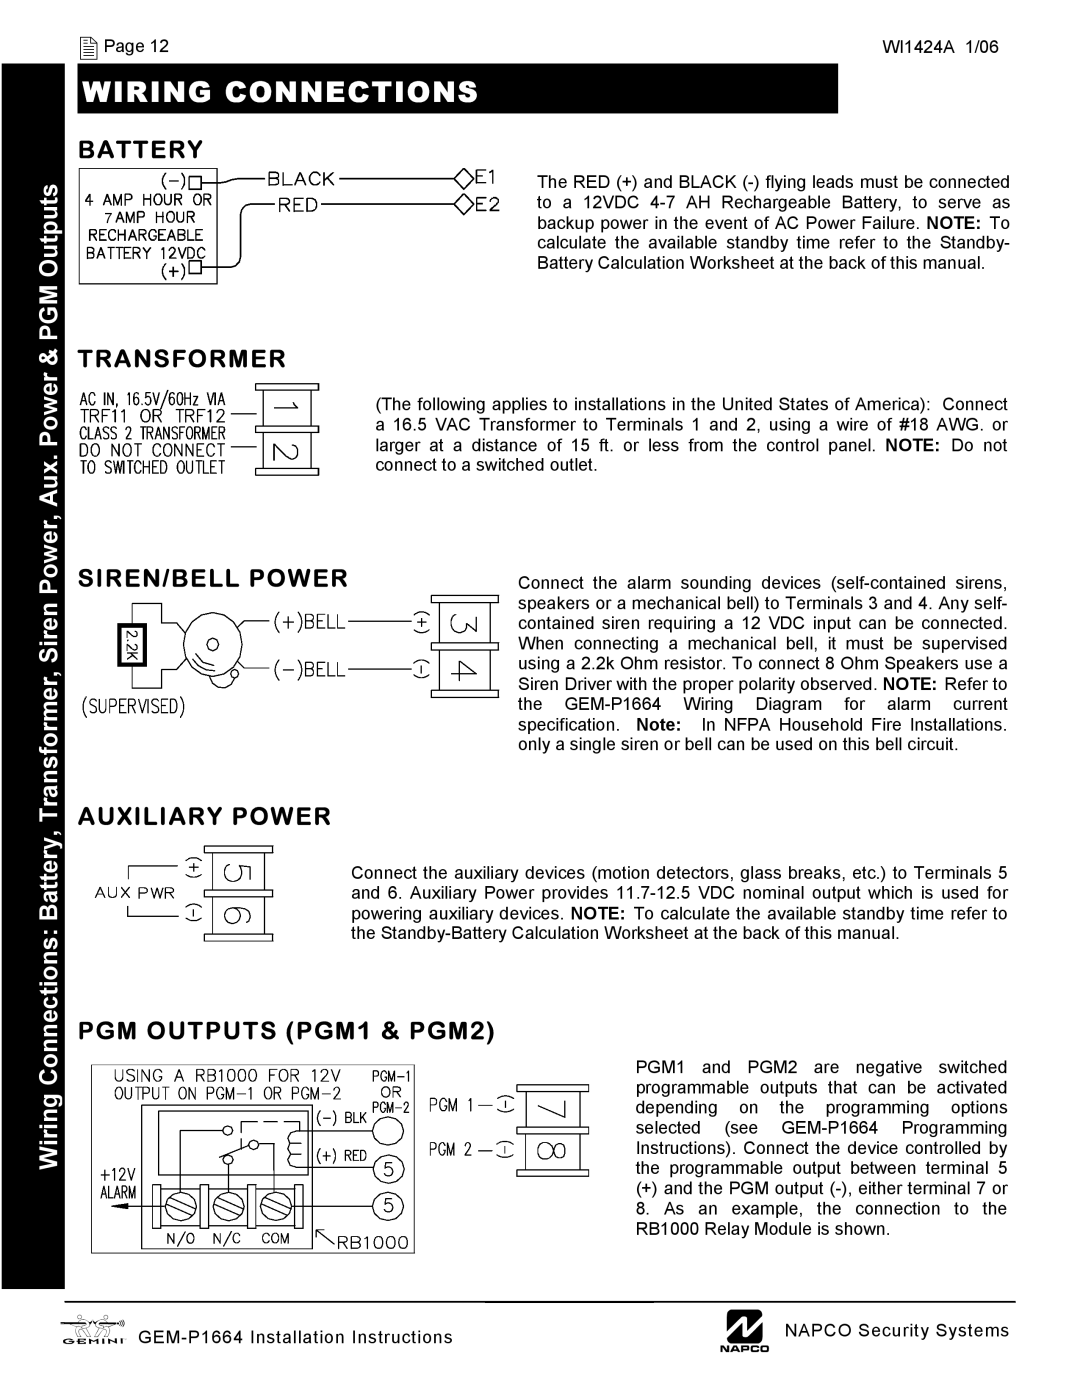 Napco Security Technologies GEM-P1664 Wiring Connections, PGM Outputs, Transformer, Siren/Bell Power, Auxiliary Power 